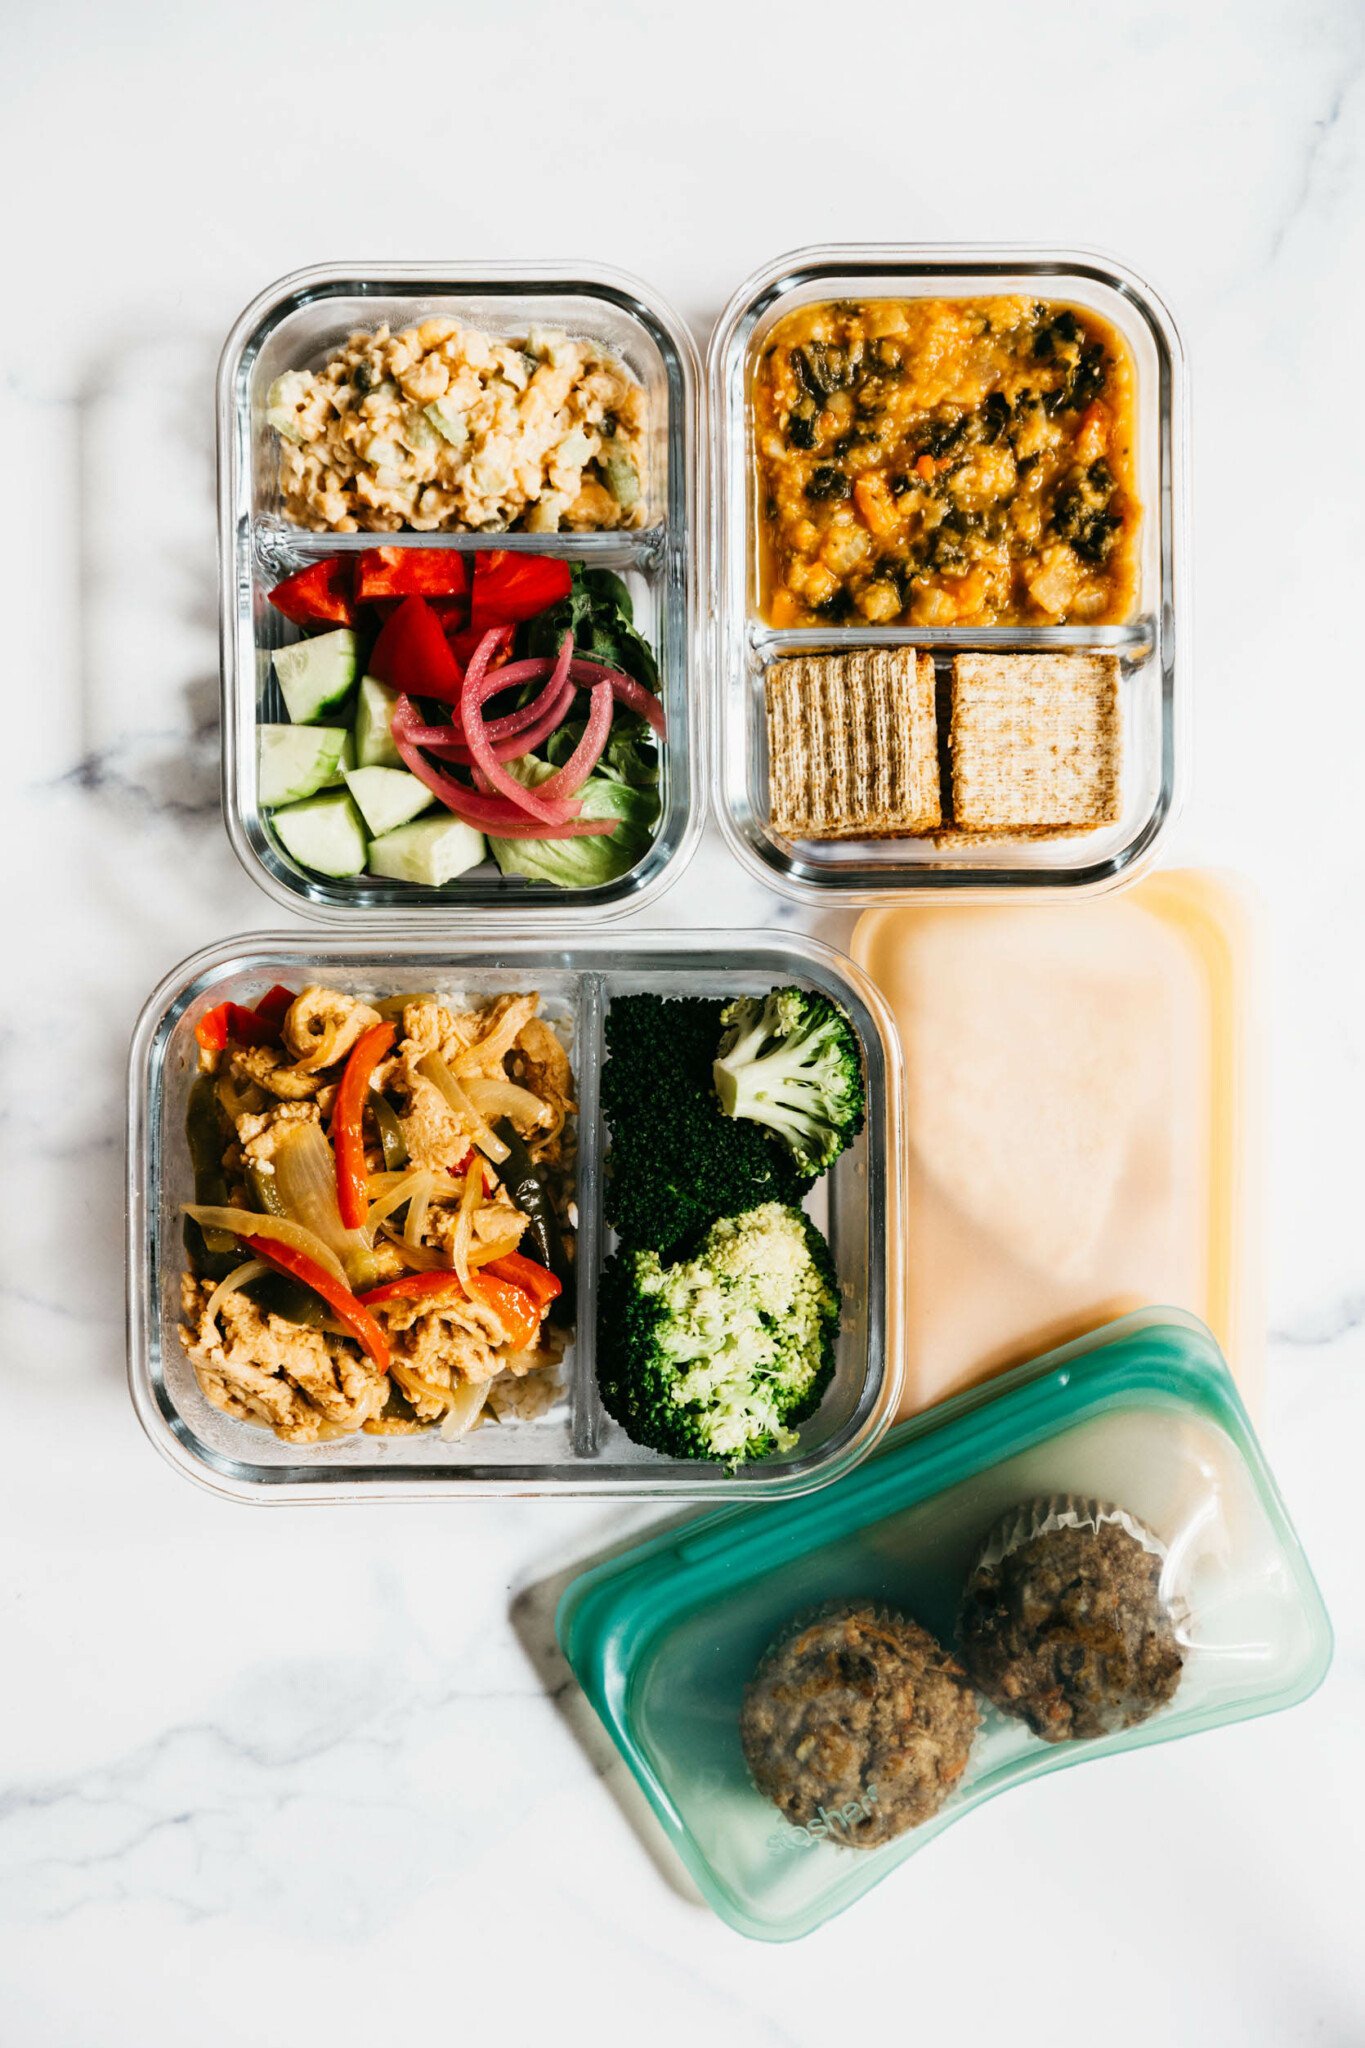 A Beginner's Guide to Vegan Meal Prep | The Full Helping